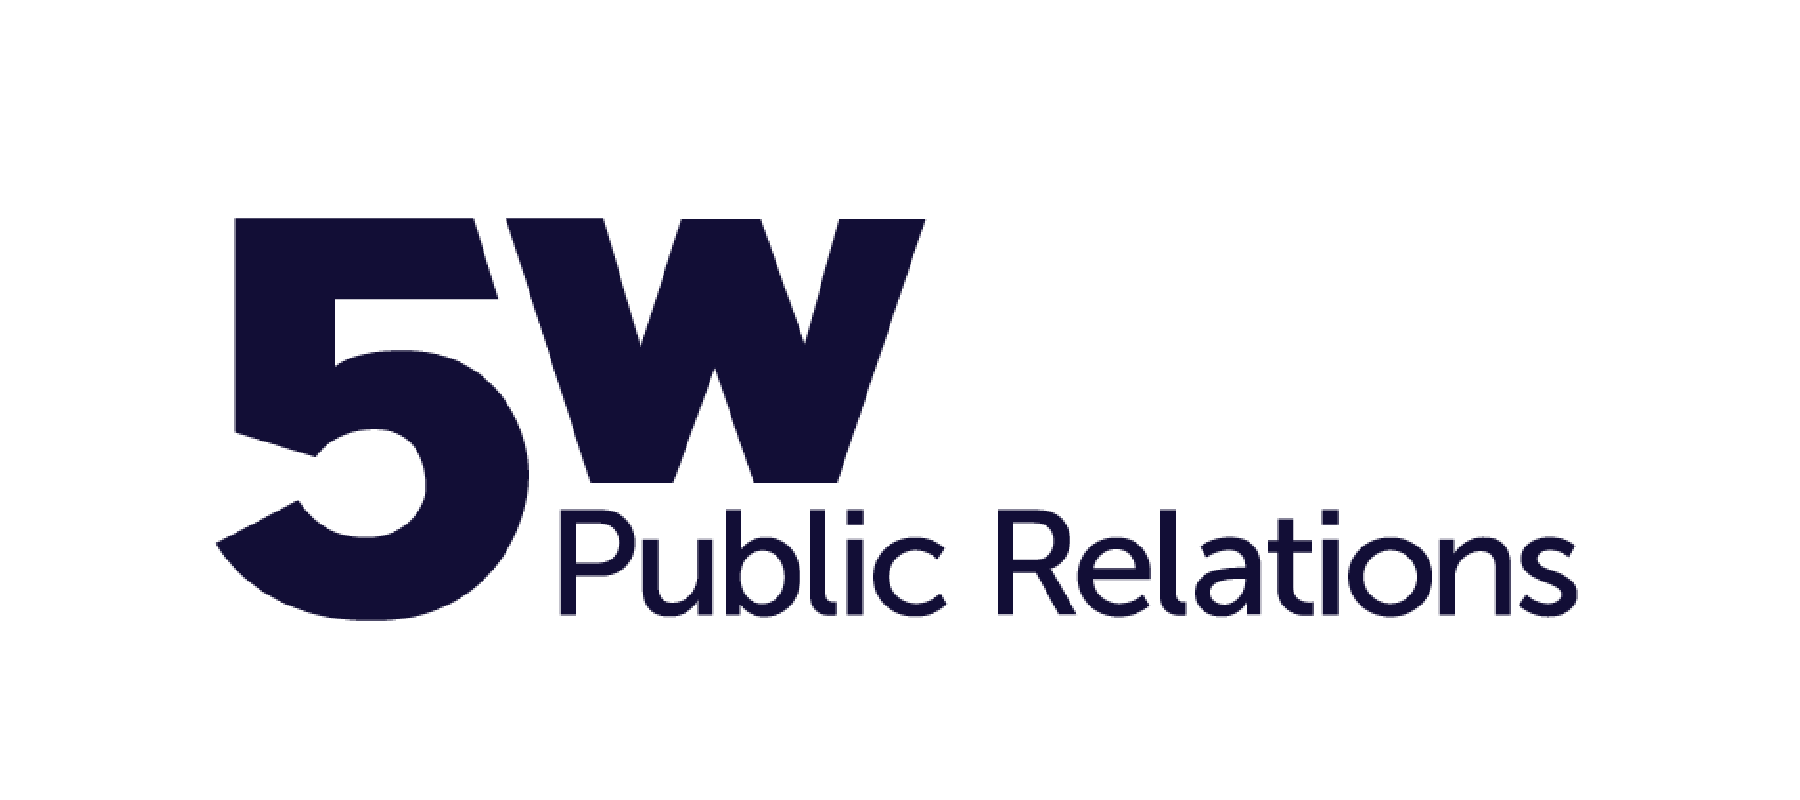 Tourism board for Lisbon Portugal selects 5W Public Relations as agency of record